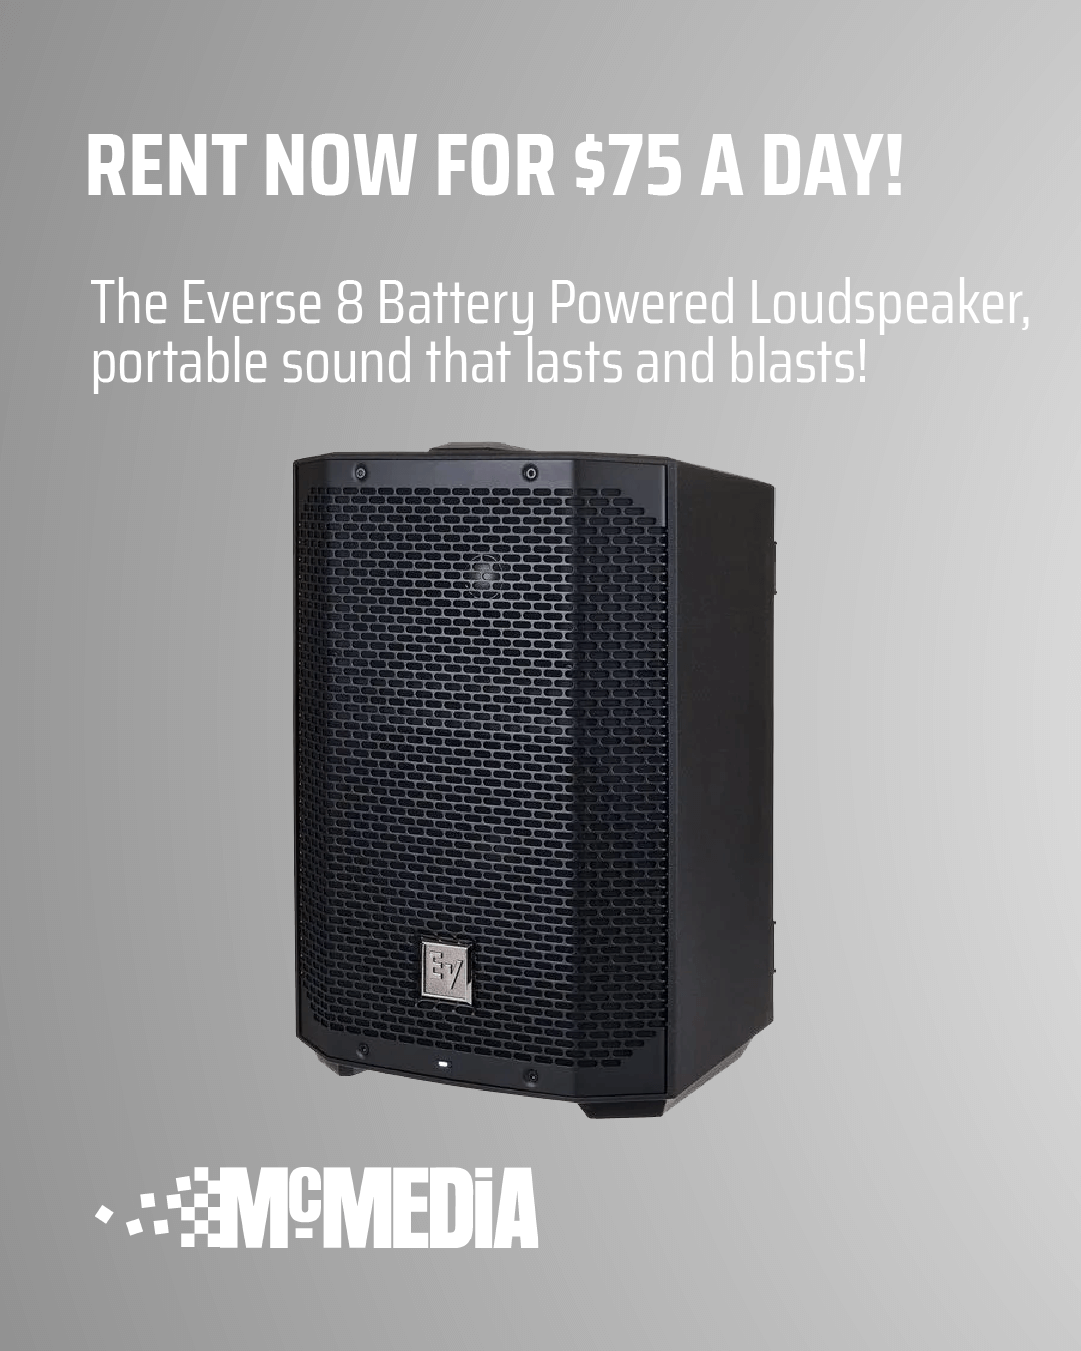 Rent the EVERSE 8 for sound that lasts & blasts!